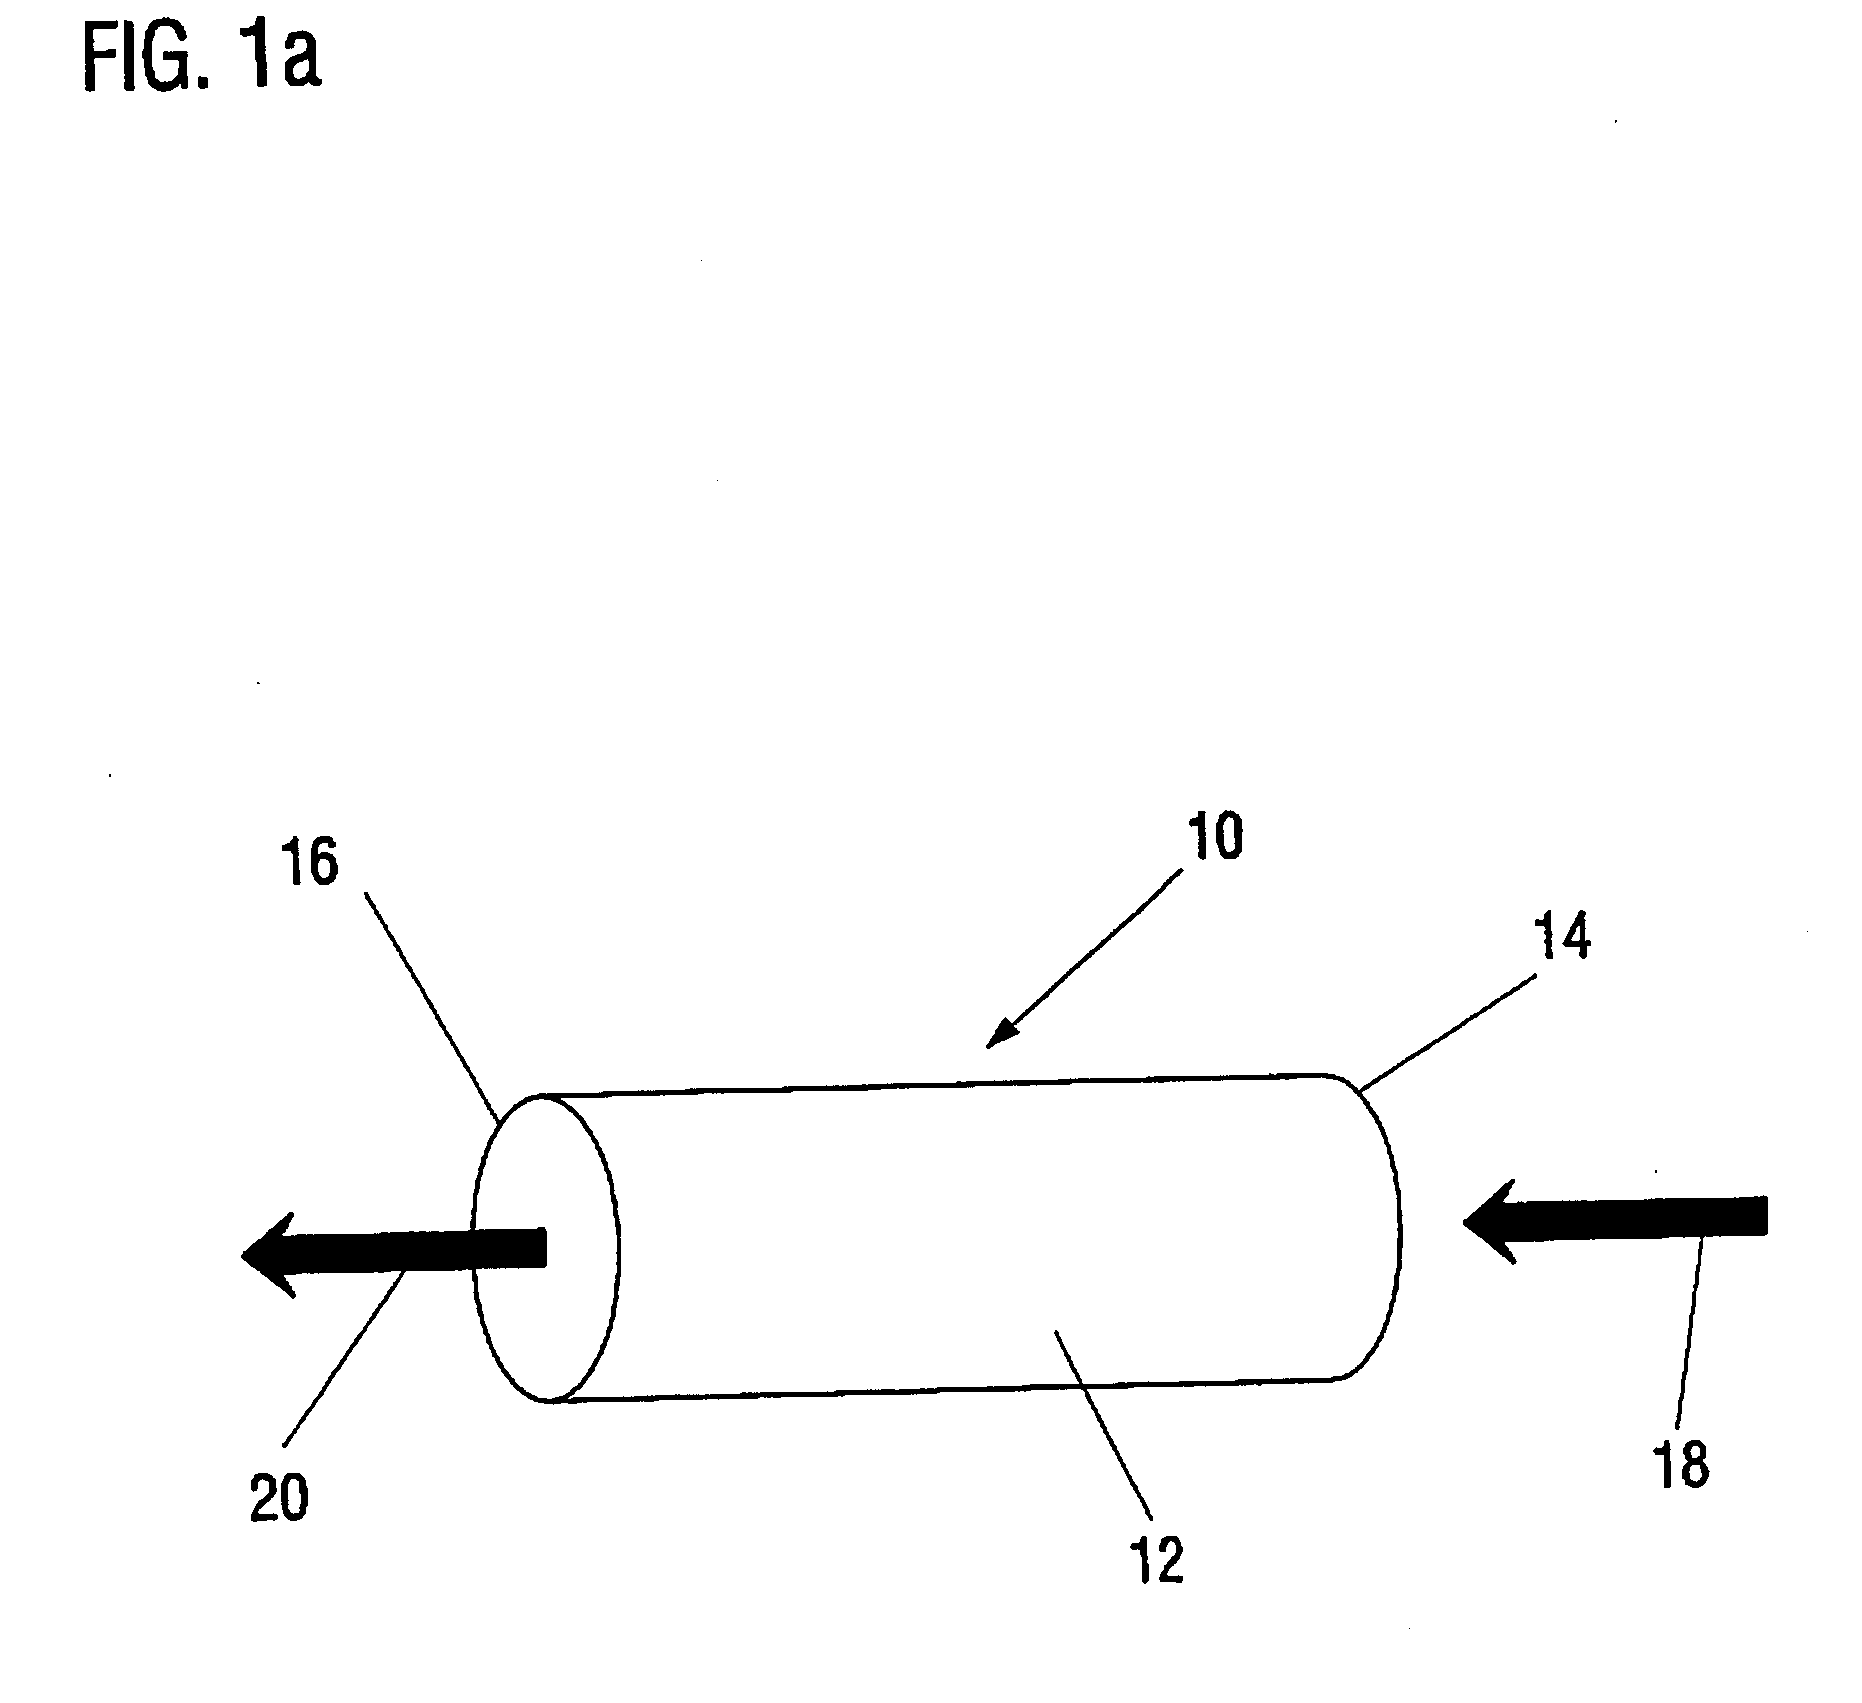 Implant for releasing an active substance into a vessel through which a body medium flows